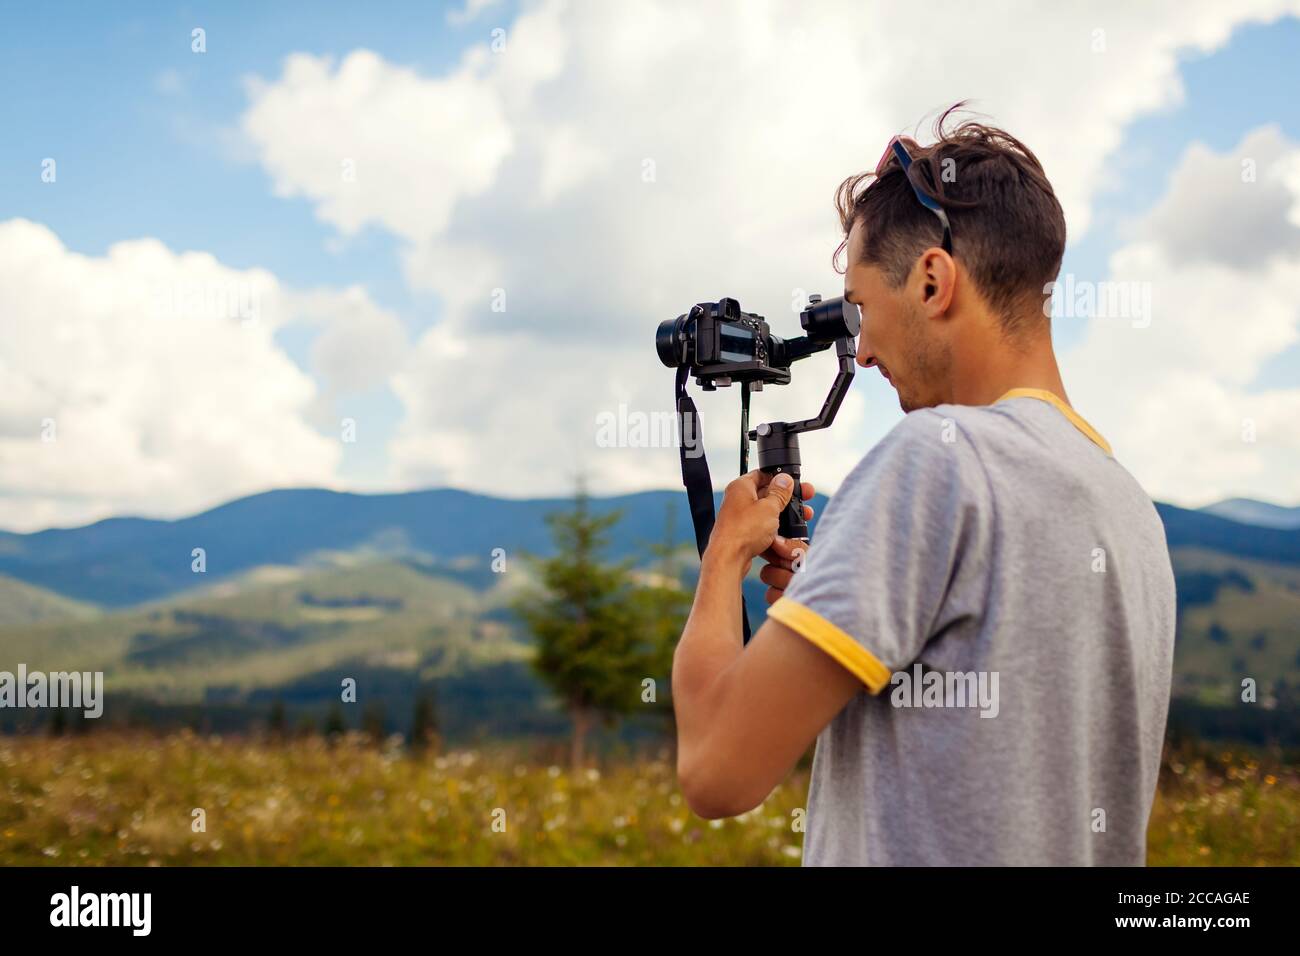 Videographer filming Carpathian mountains landscape. Man using steadicam and camera to make footage. Video shoot Stock Photo